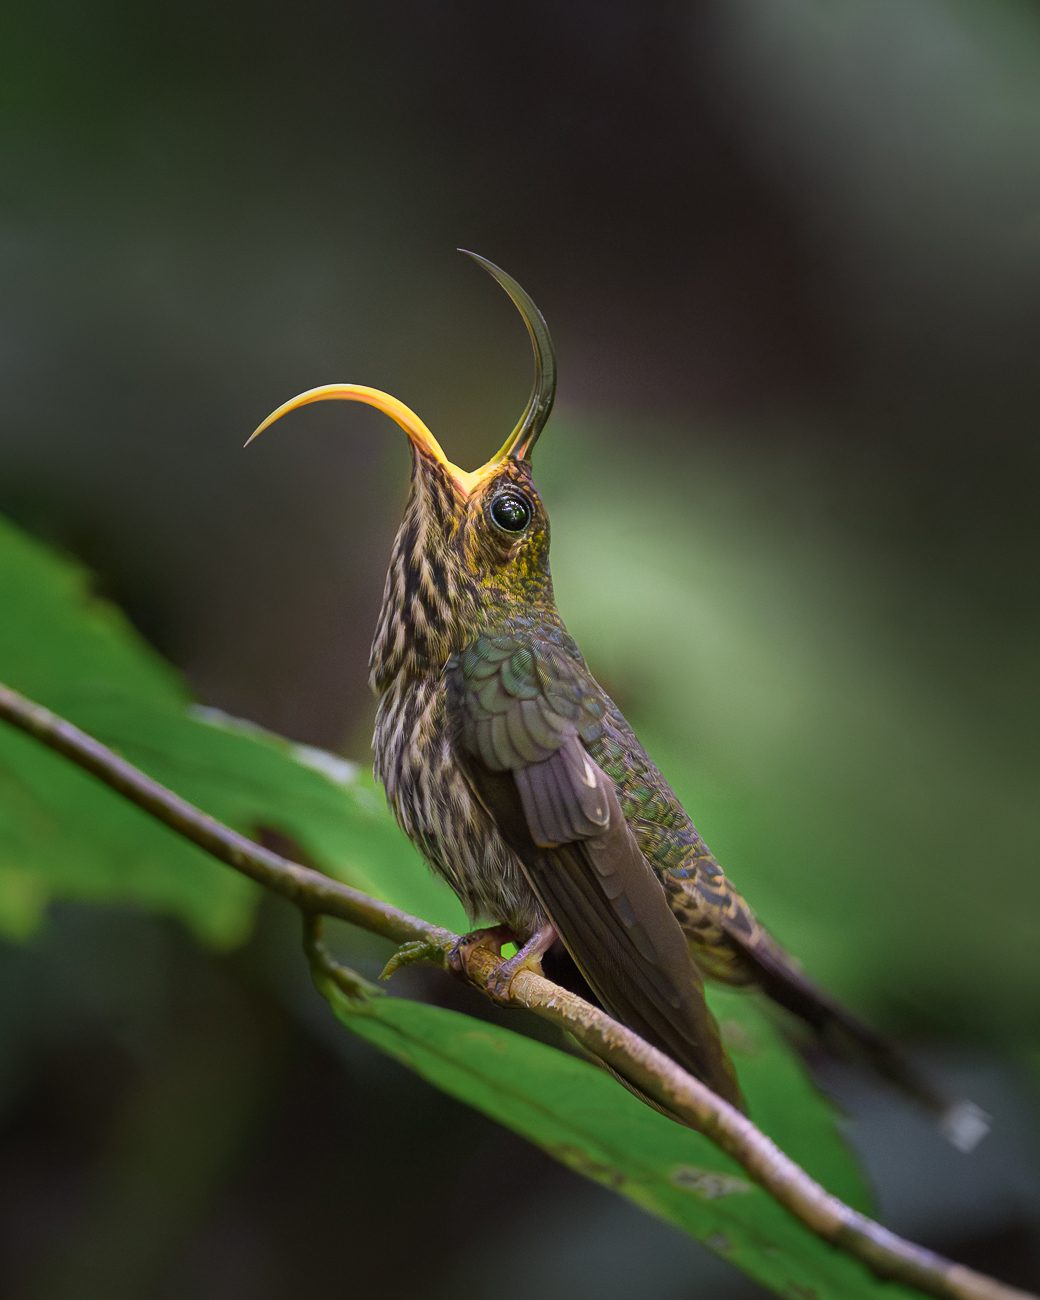 A green and brown patterned bird with a yellow mandible, opens its impressively curved bill.